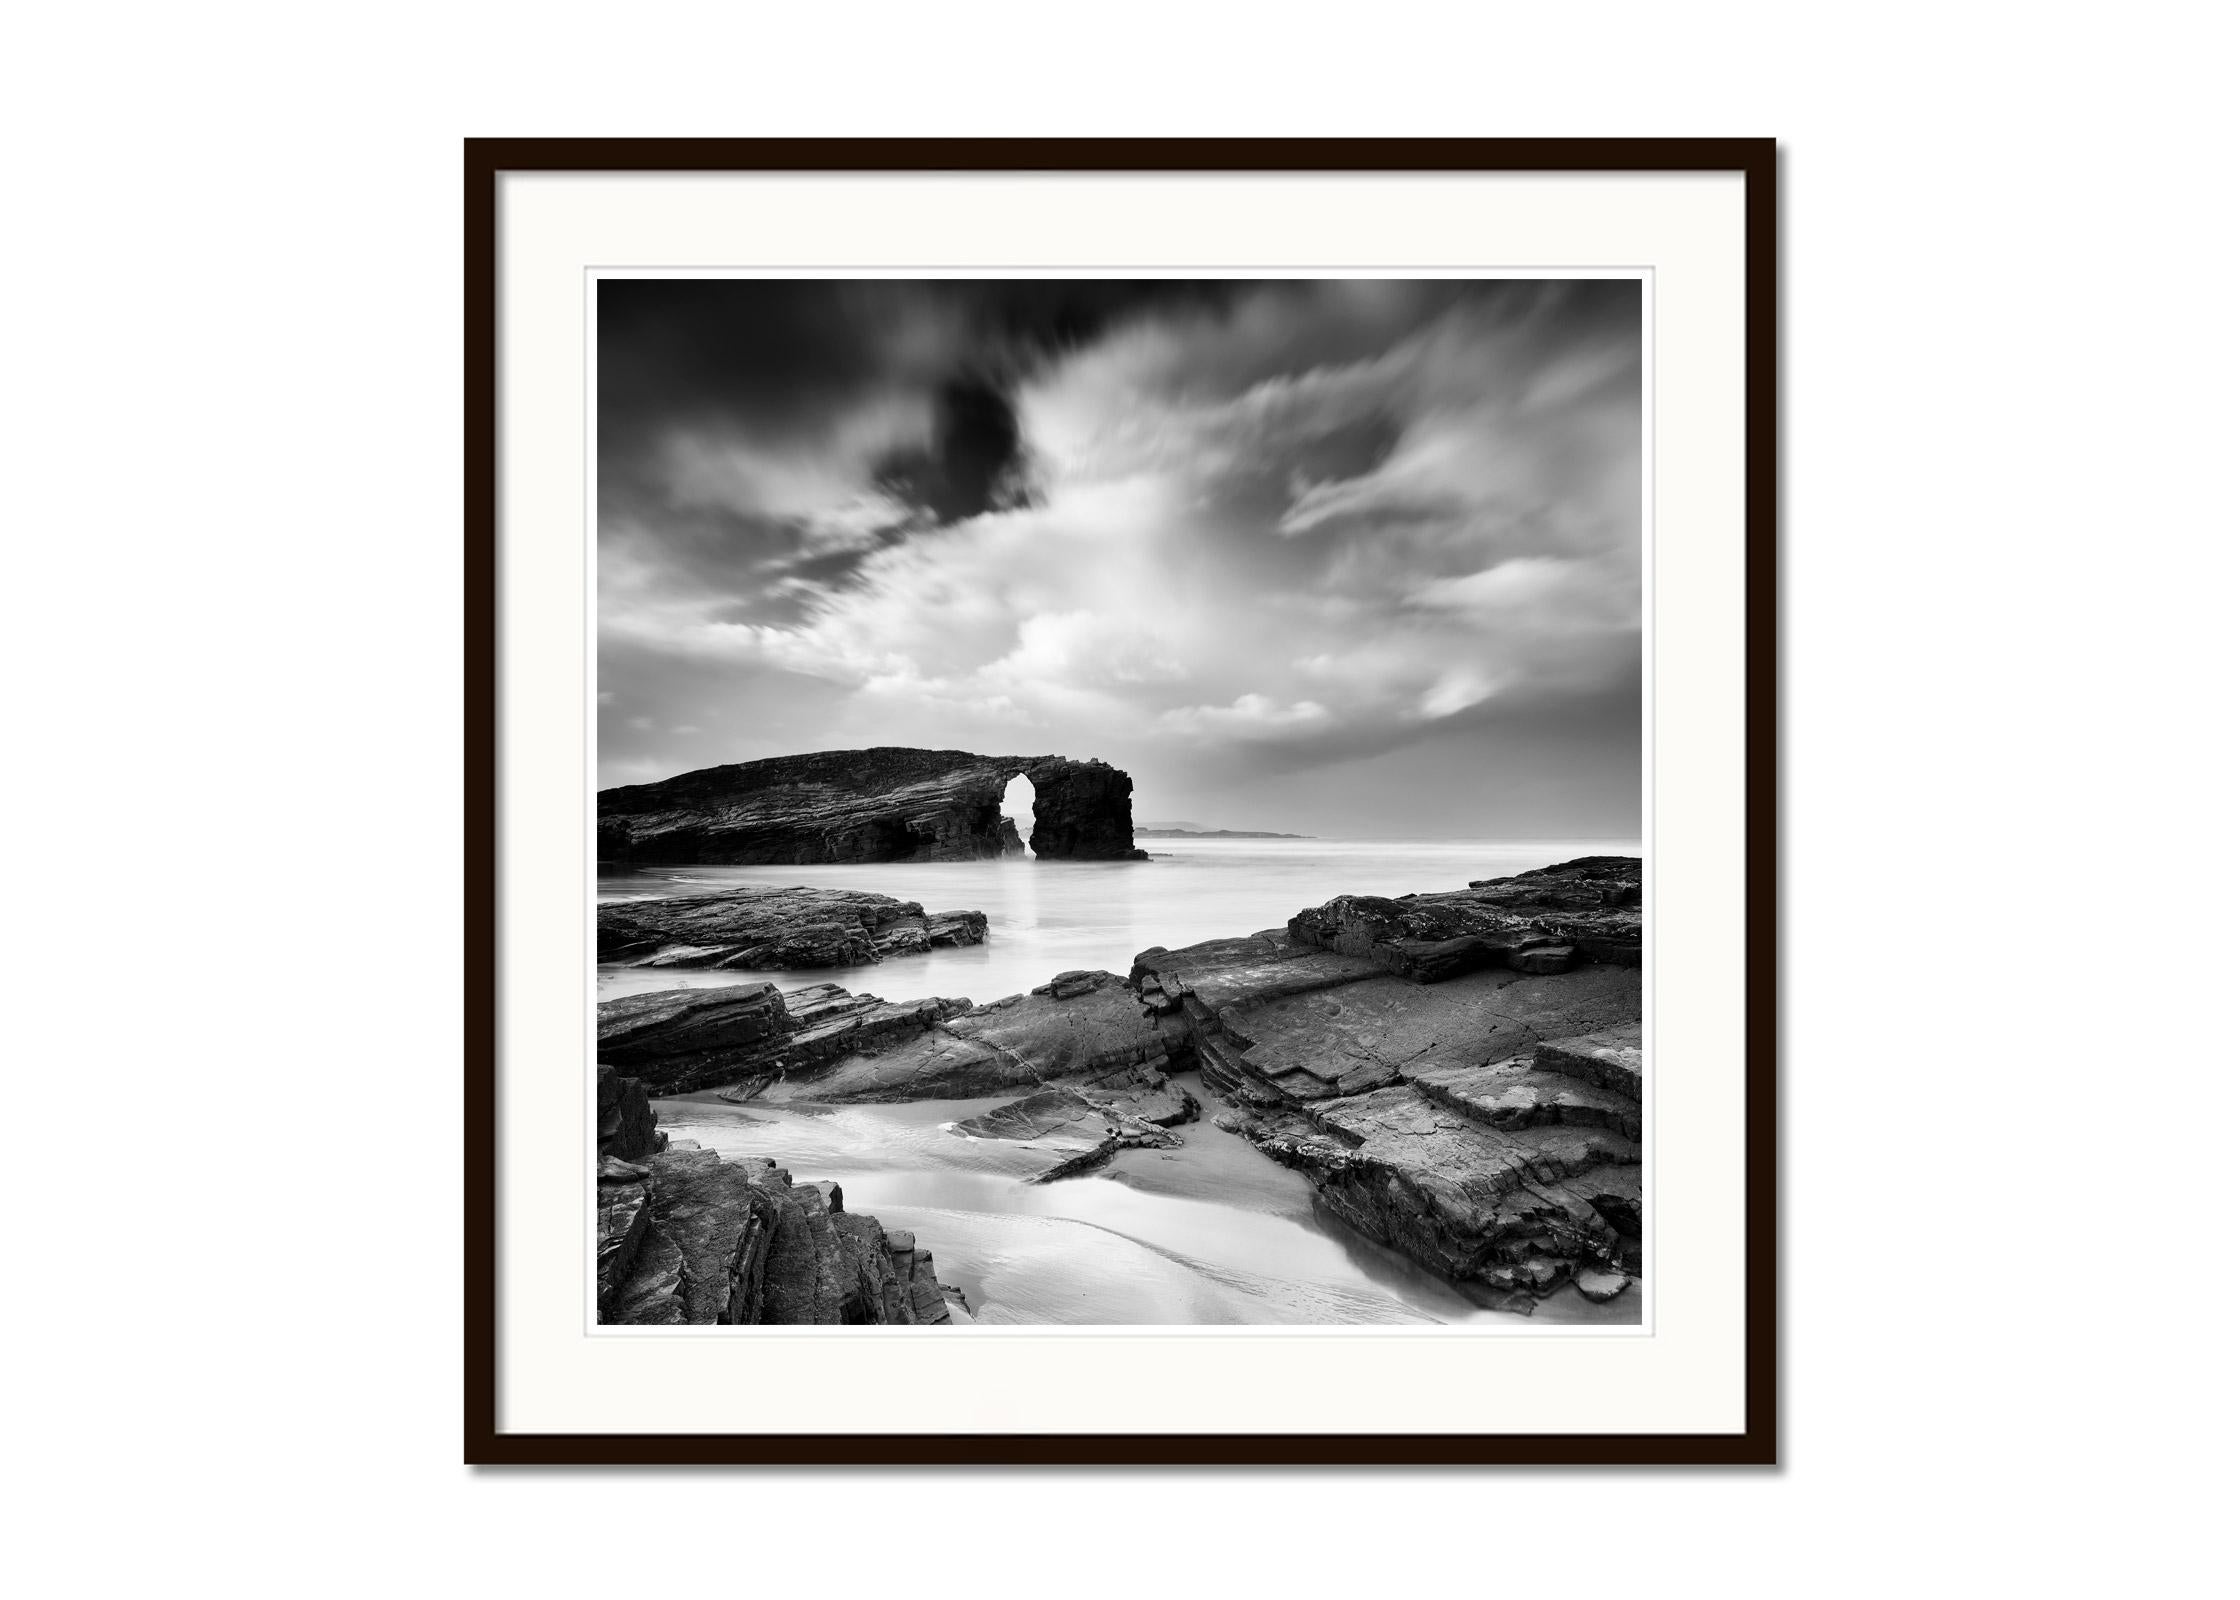 Black and white fine art long exposure waterscape - landscape photography. Archival pigment ink print as part of a limited edition of 7. All Gerald Berghammer prints are made to order in limited editions on Hahnemuehle Photo Rag Baryta. Each print